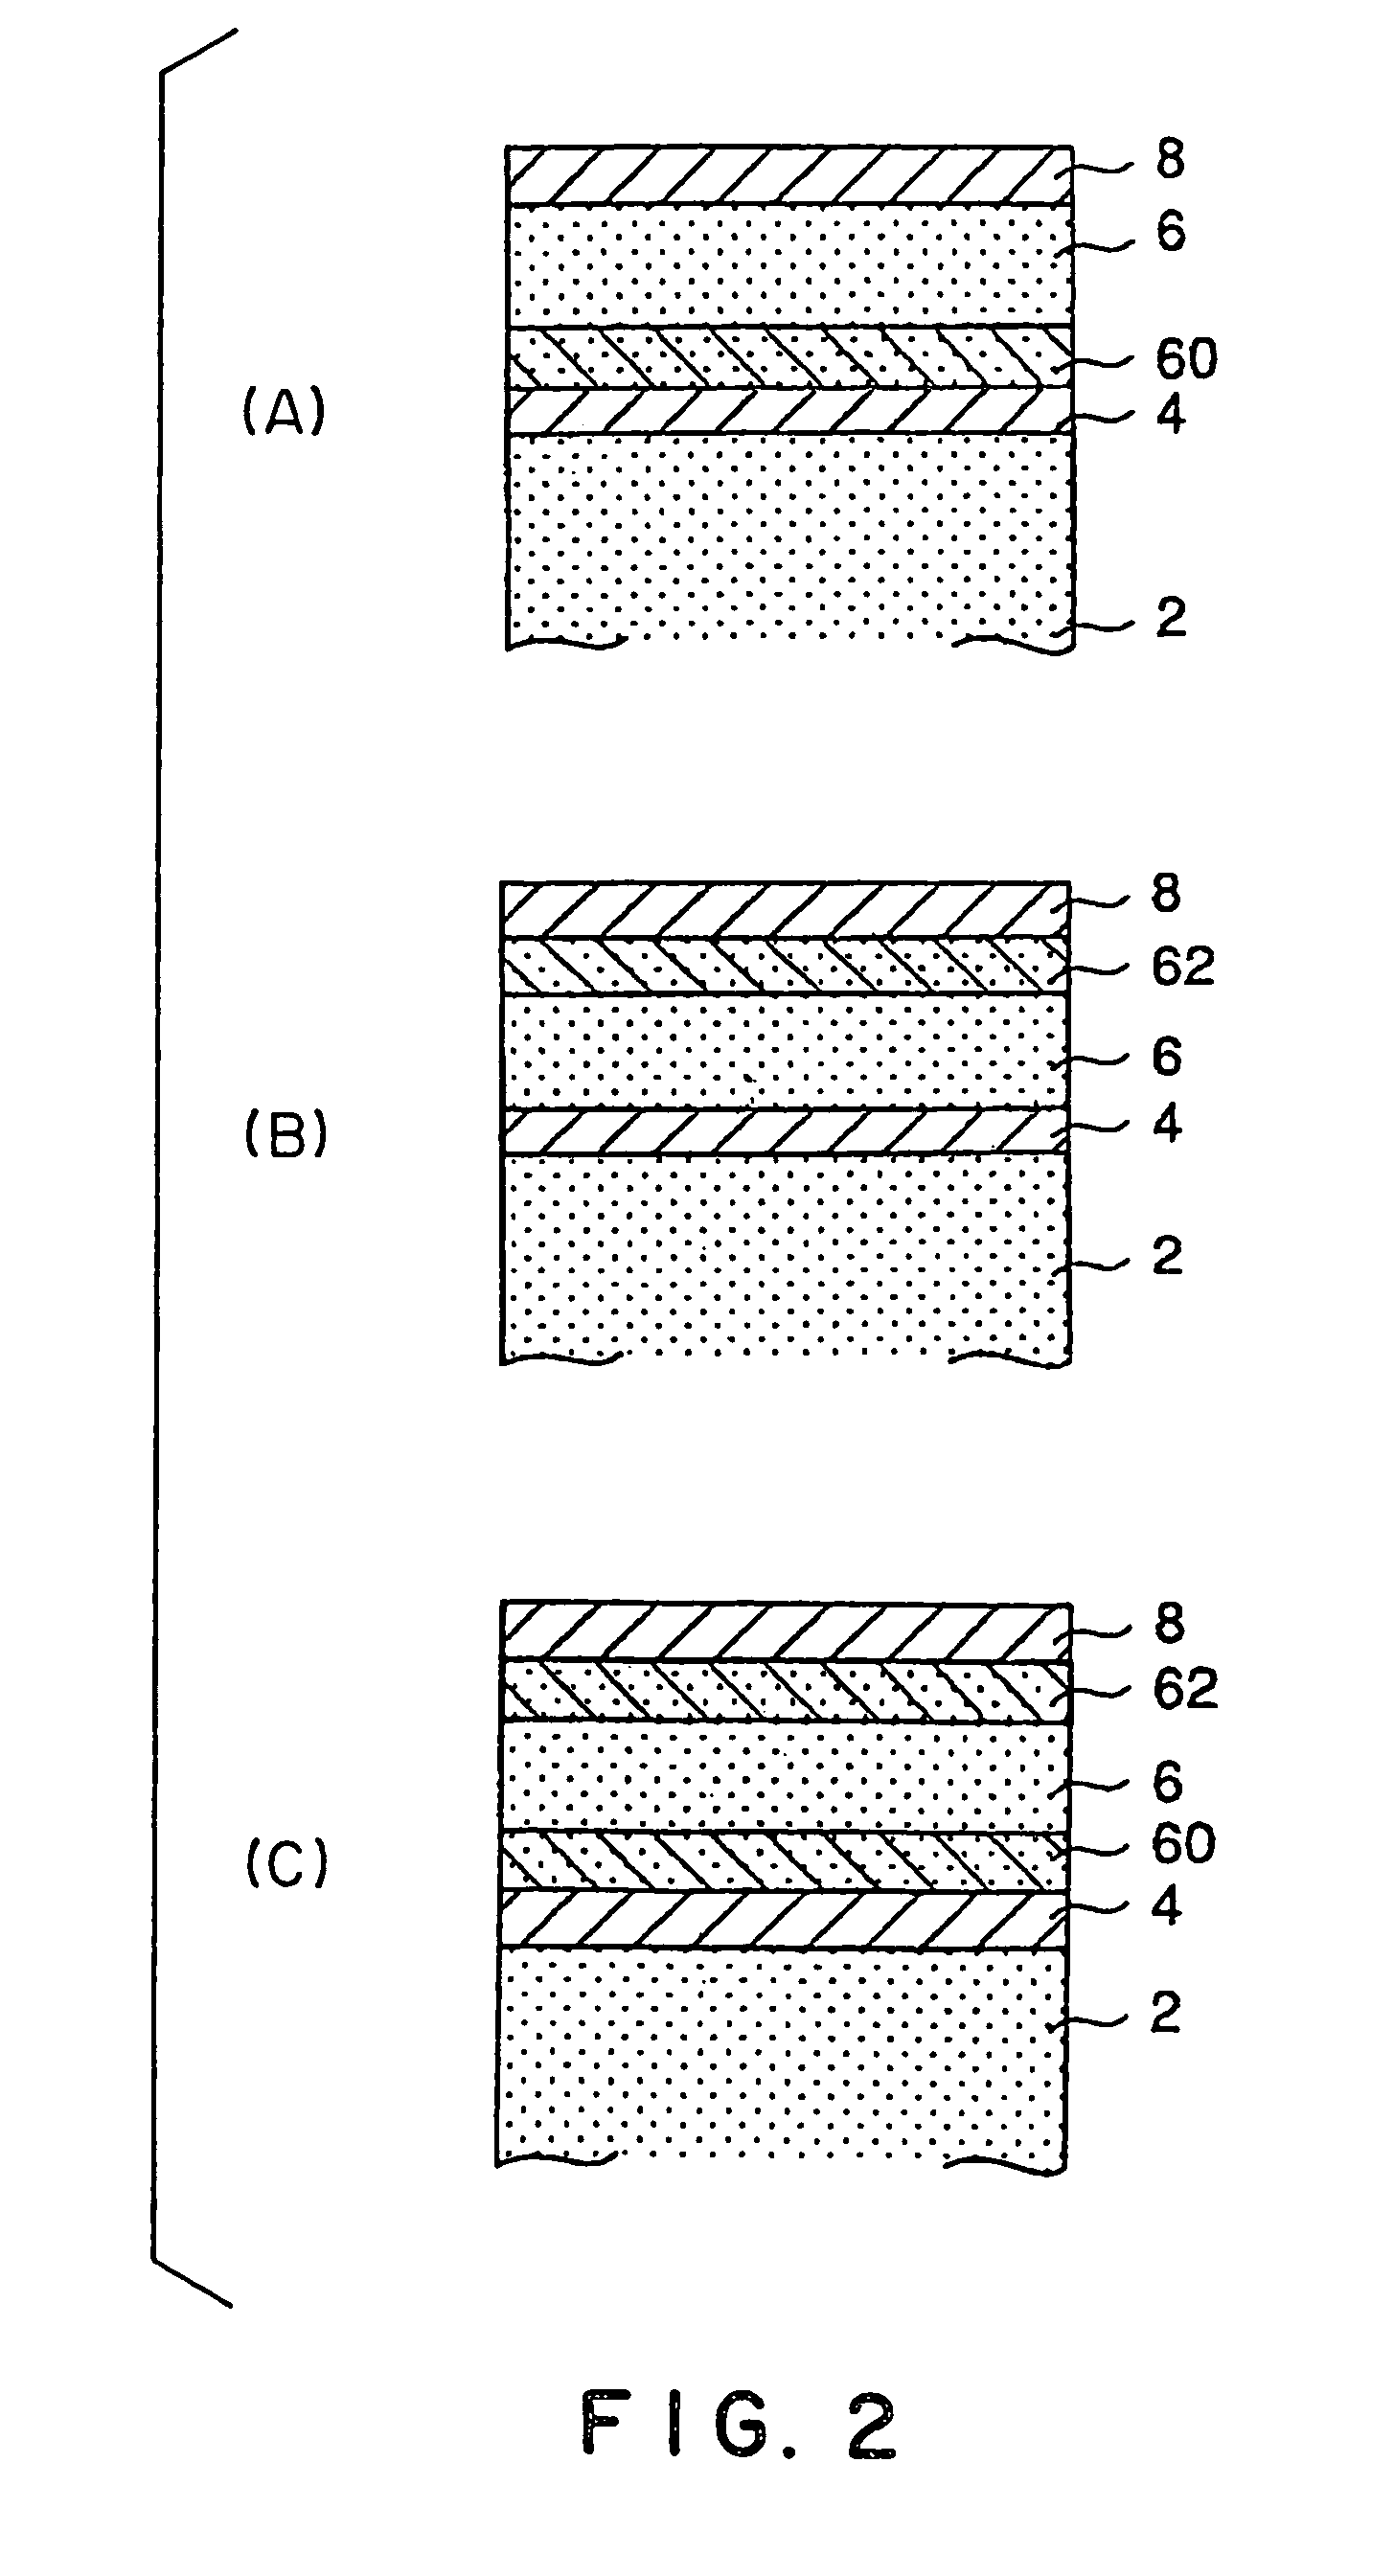 Film forming method for depositing a plurality of high-k dielectric films